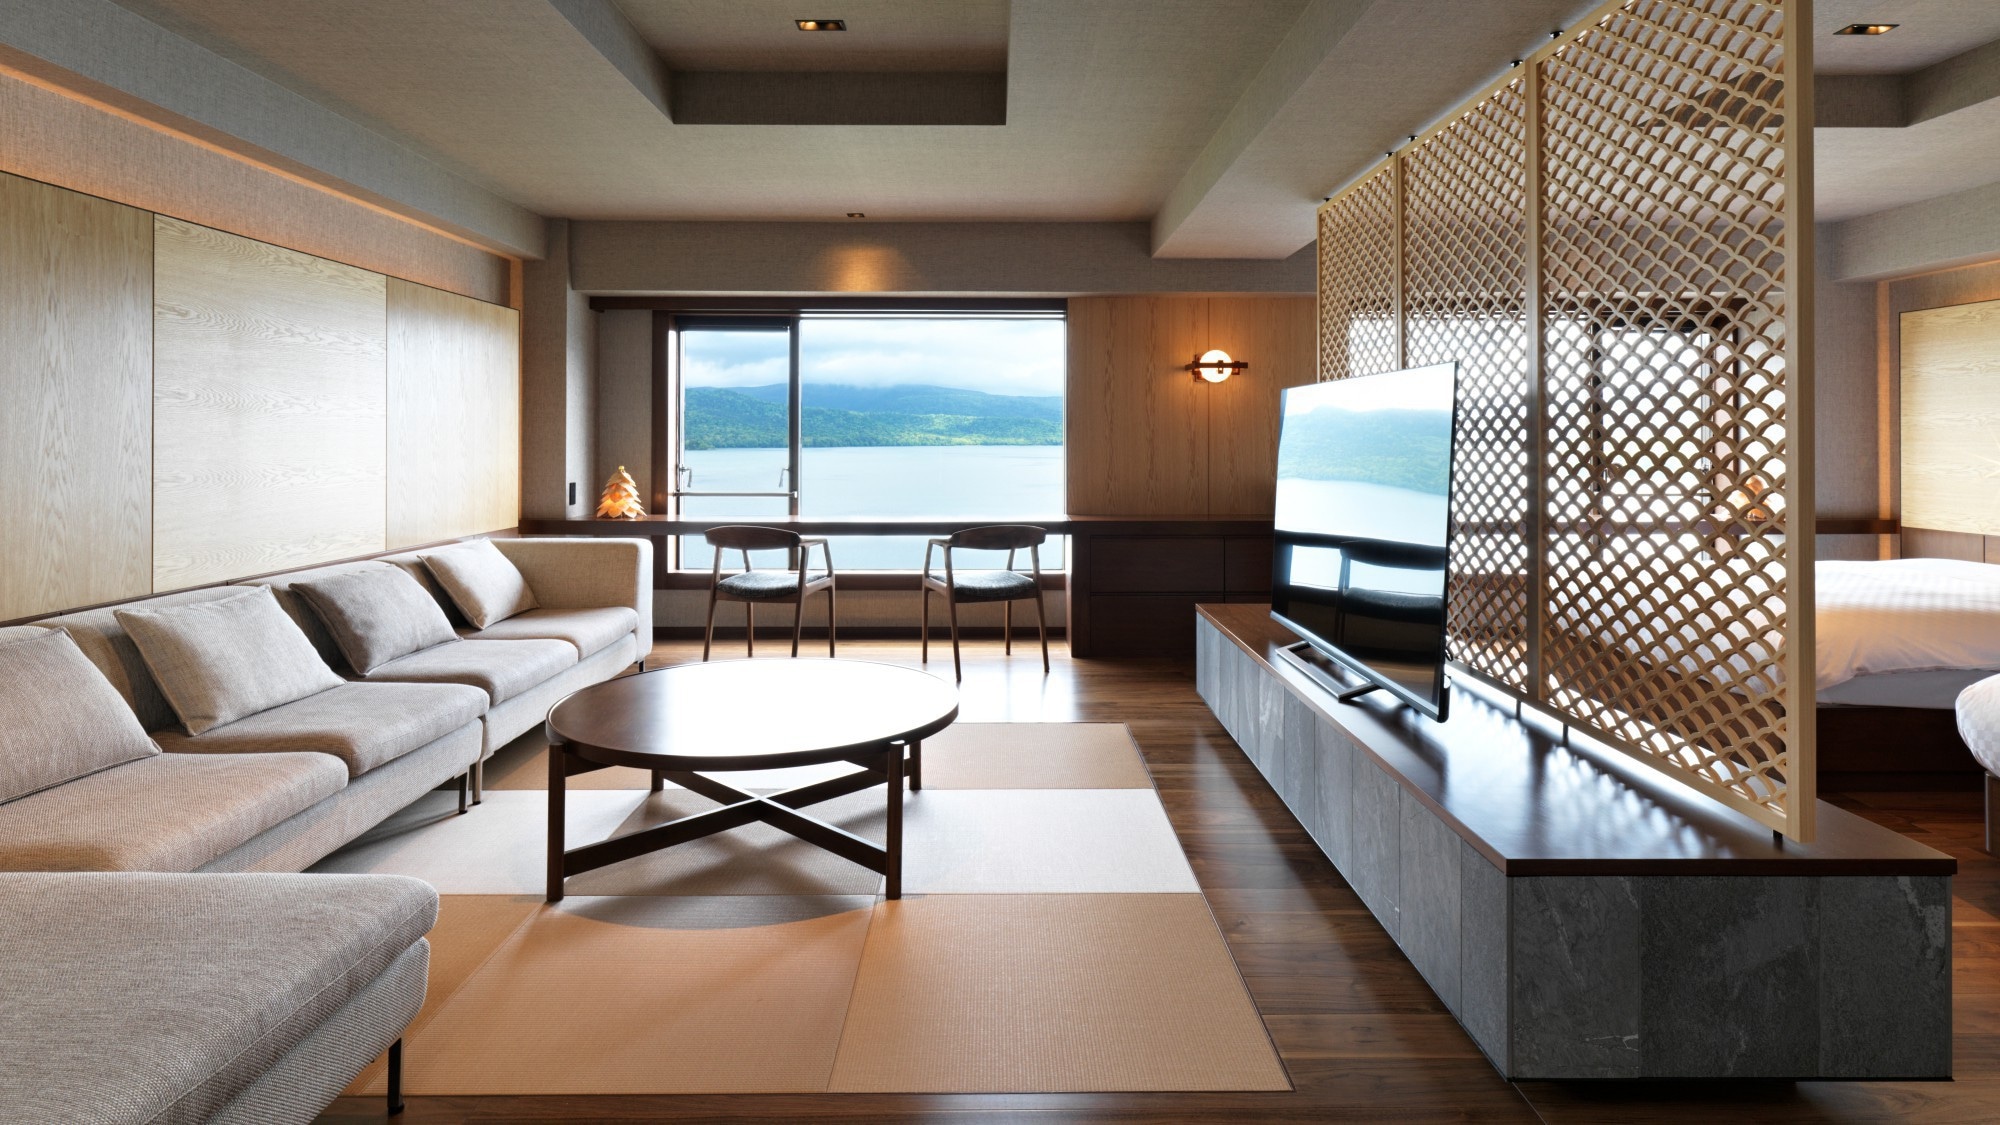 [Lake side] An example of a DX Japanese-Western style room (with bath) / An open space where you can have Lake Akan in front of you (image)